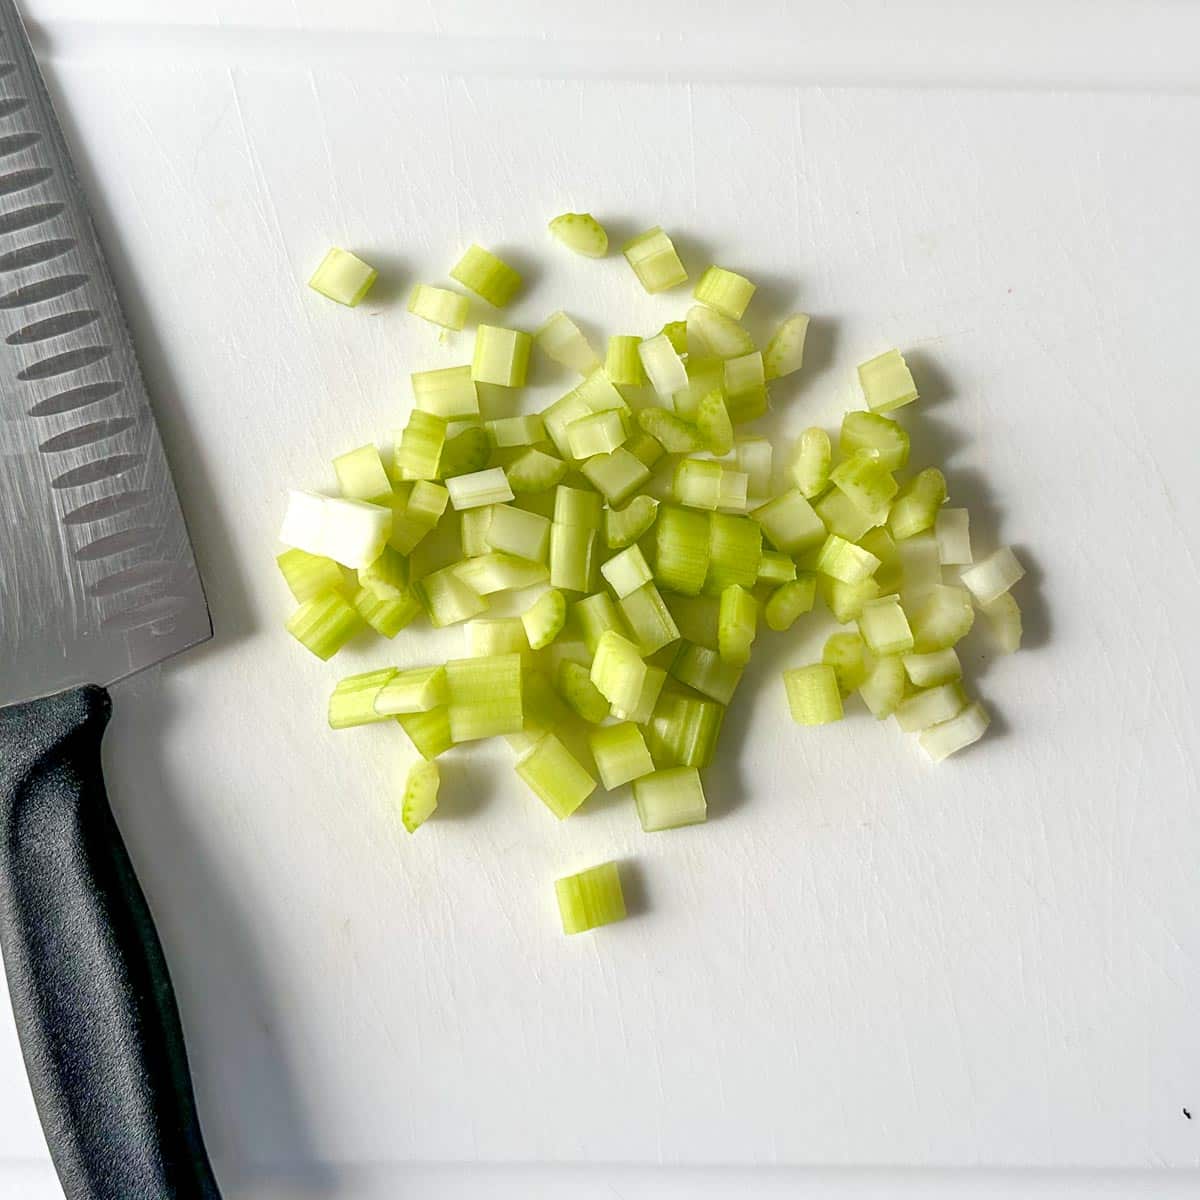 Chopped celery and a kitchen knife sit on a white cutting board.